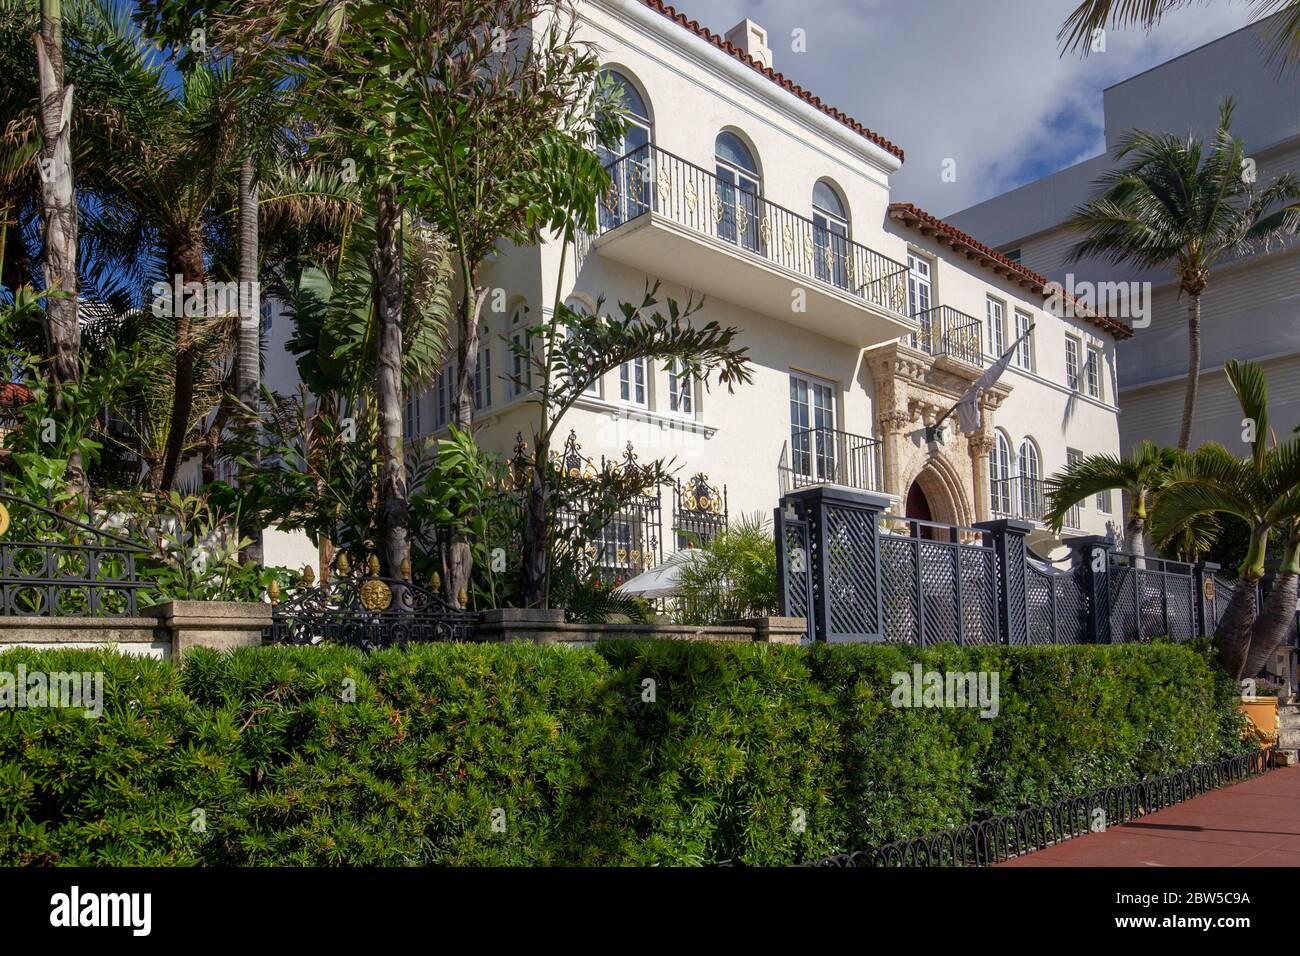 Villa Casa Casuarina or the Versace Mansion on Ocean Drive, South Beach,  Miami Florida.Place where Gianni Versace was murdered by Andrew Cunanan  Stock Photo - Alamy